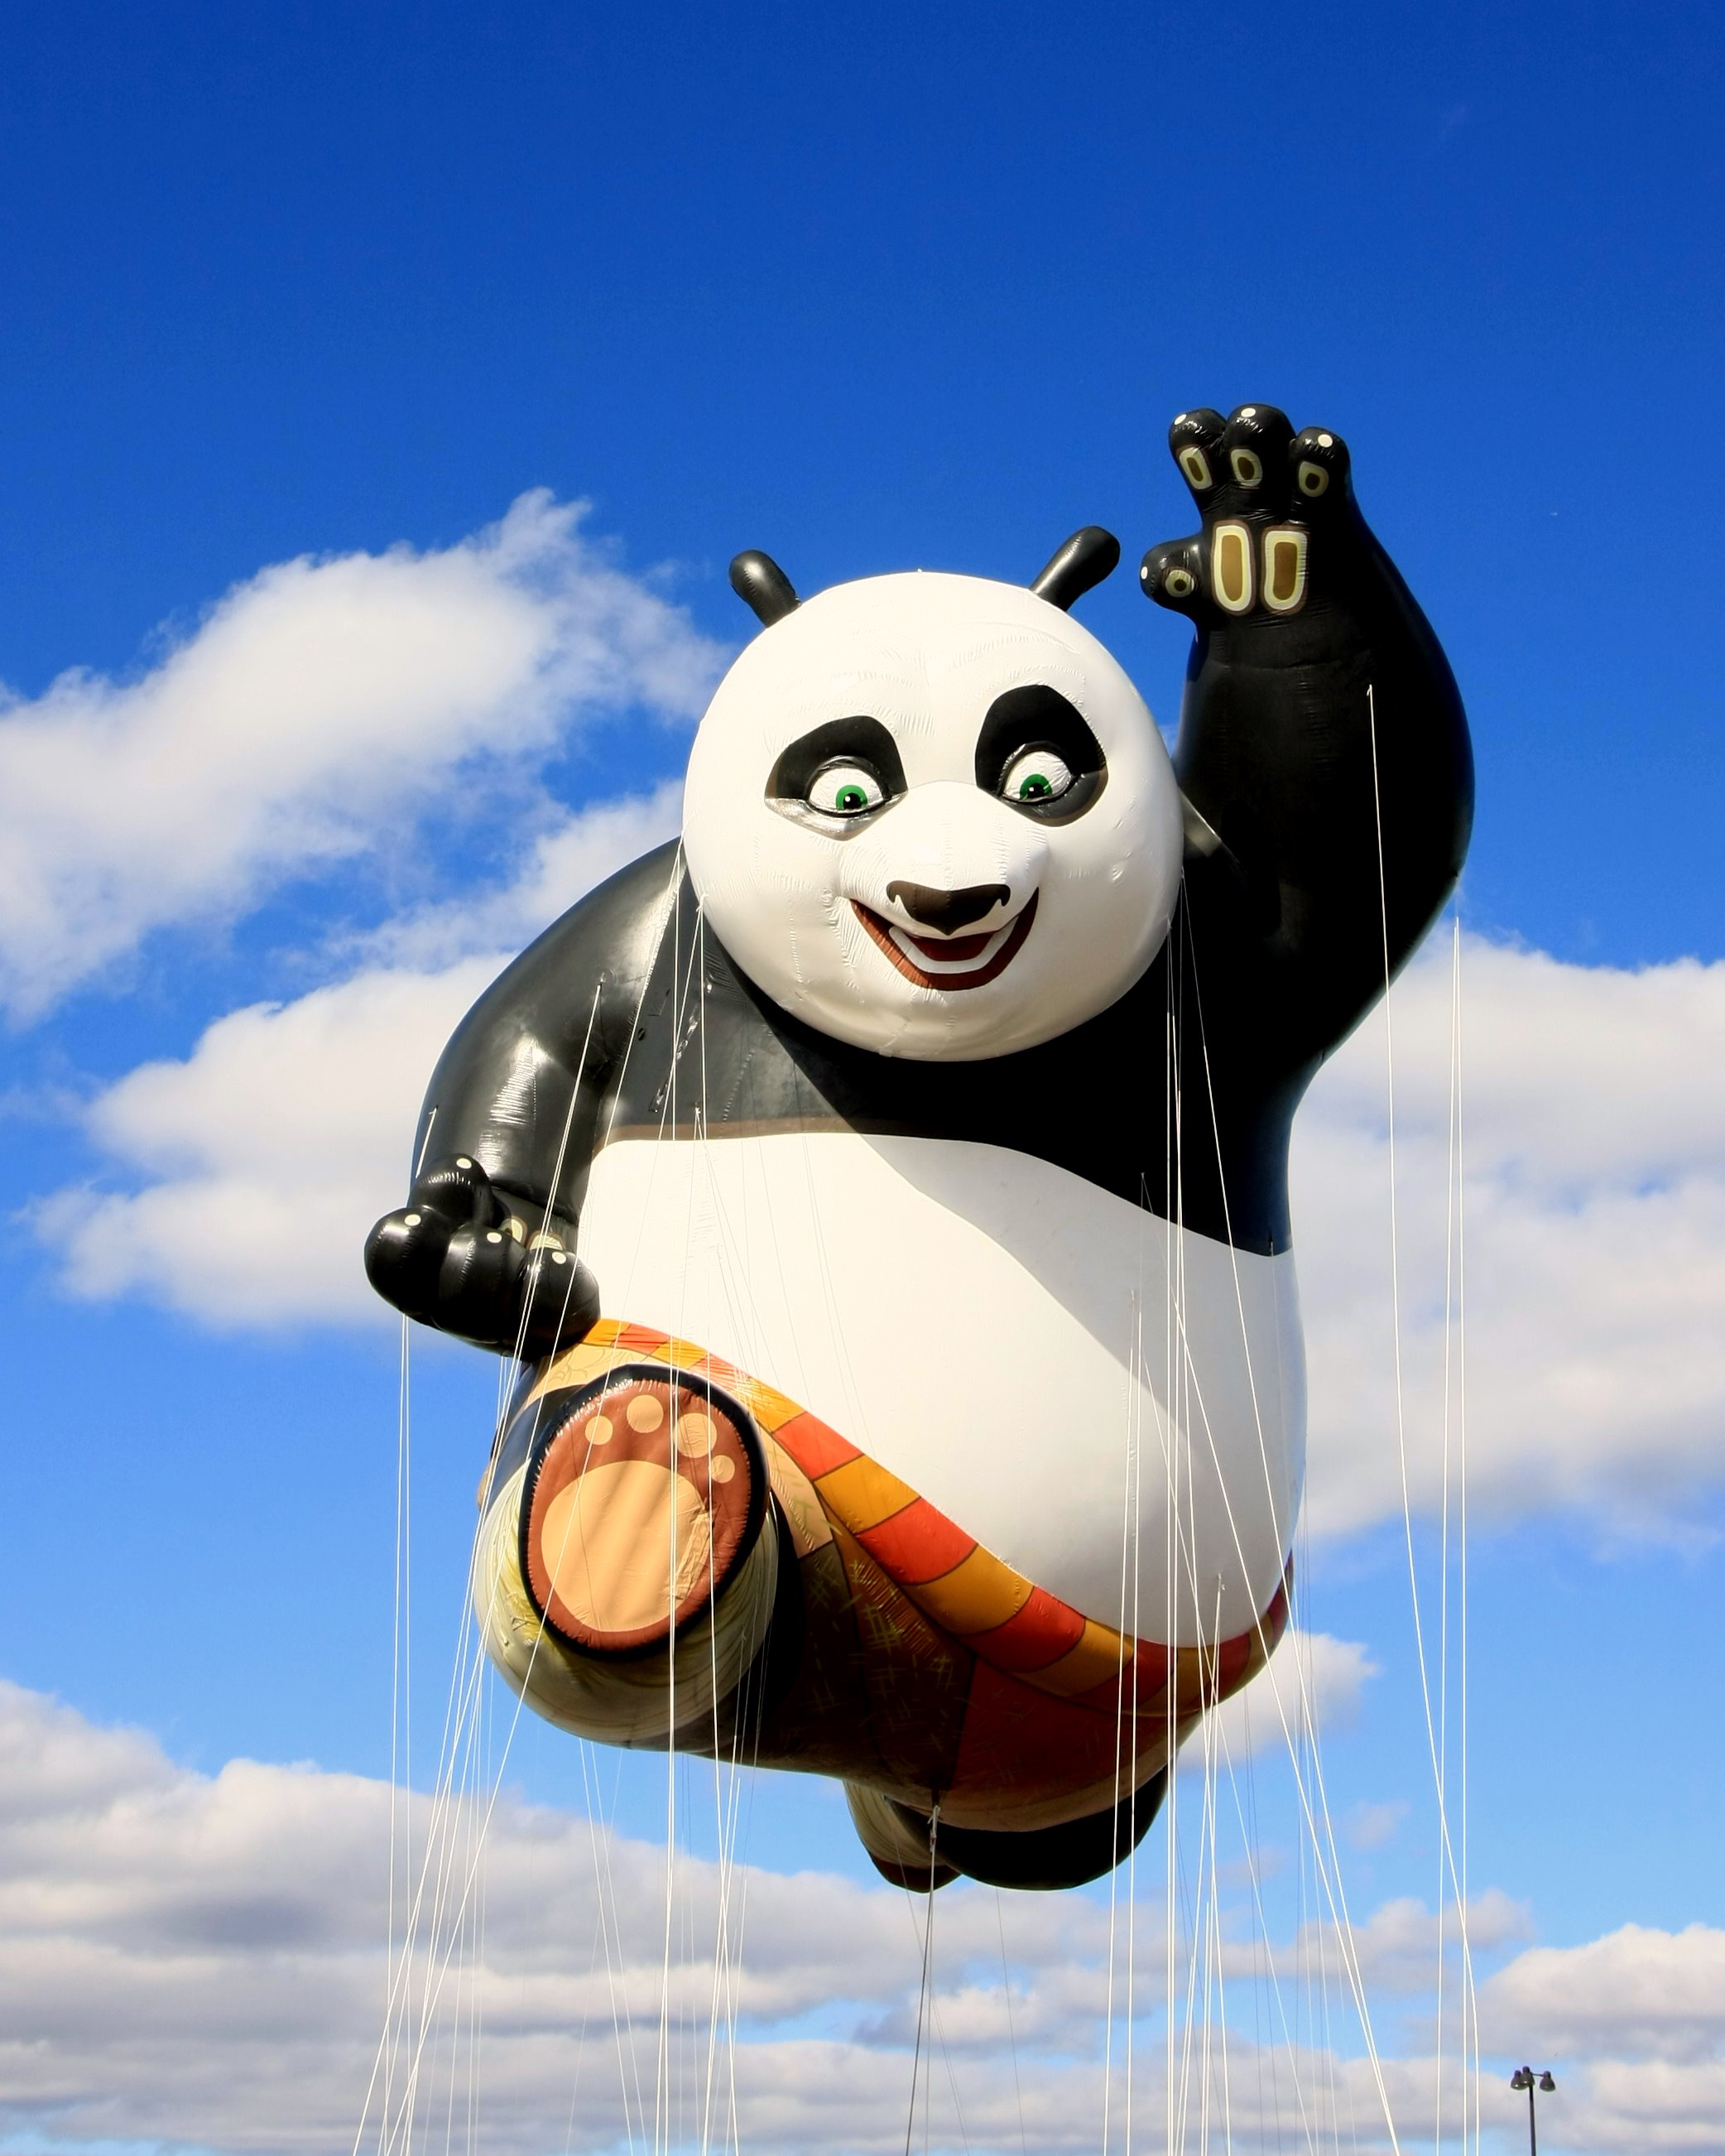 The “Kung Fu Panda” Balloon From Macy’s Thanksgiving Day Parade Coming to St. Louis | Review St ...